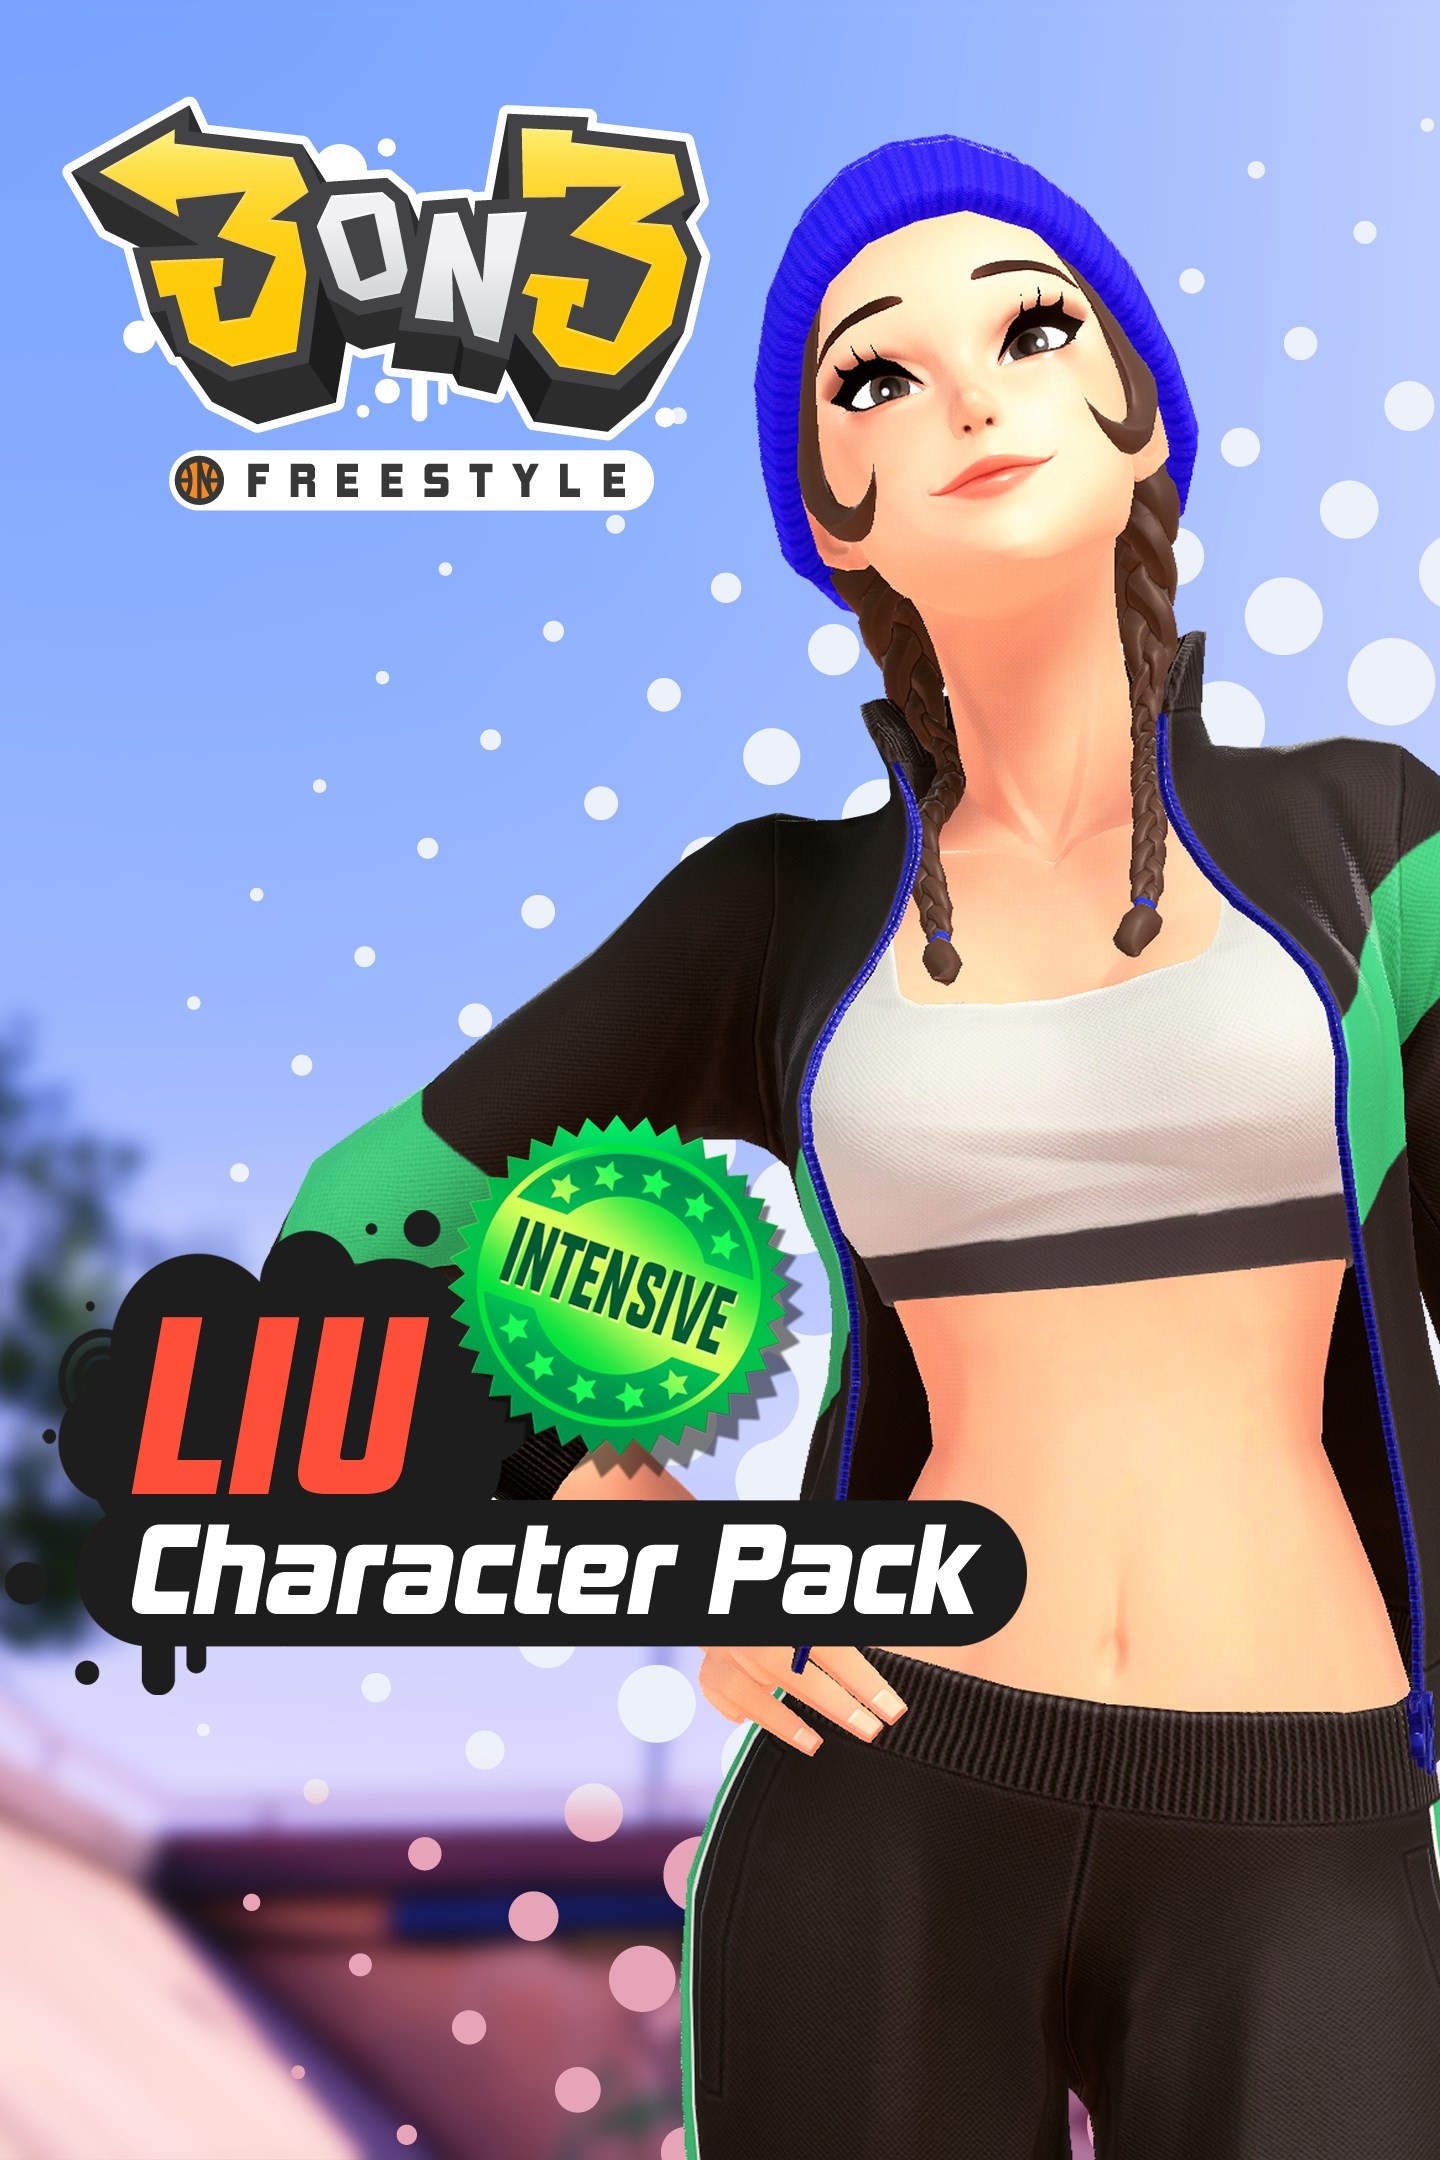 3on3 FreeStyle – Liu Intensive Pack/Xbox